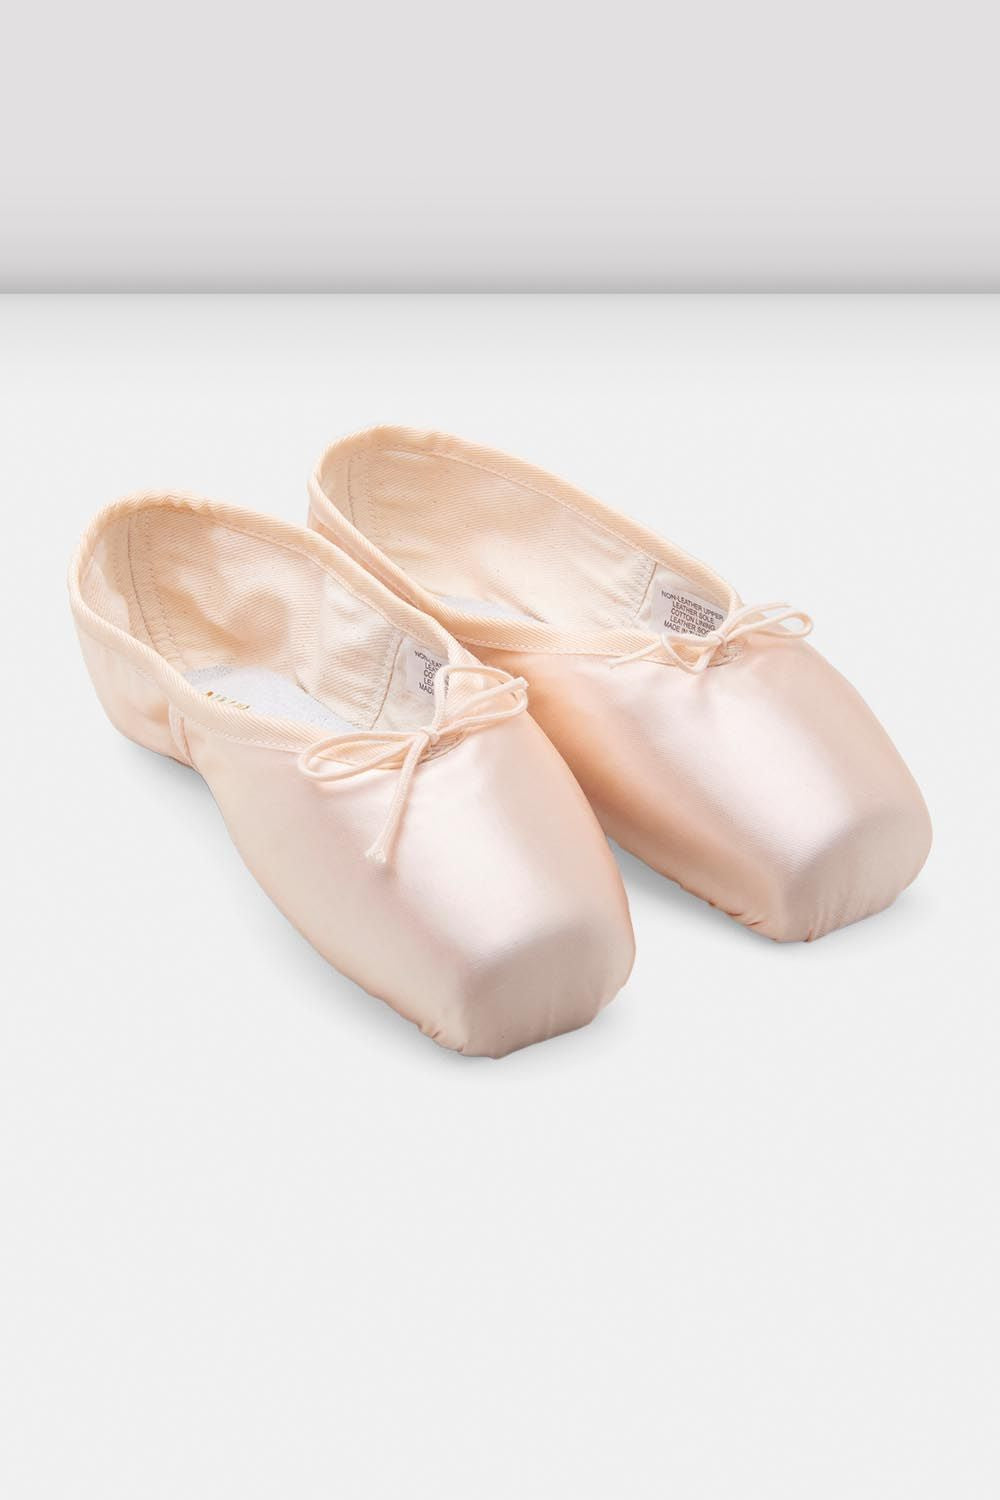 Heritage Pointe Shoes, B24 Satin – BLOCH Dance US